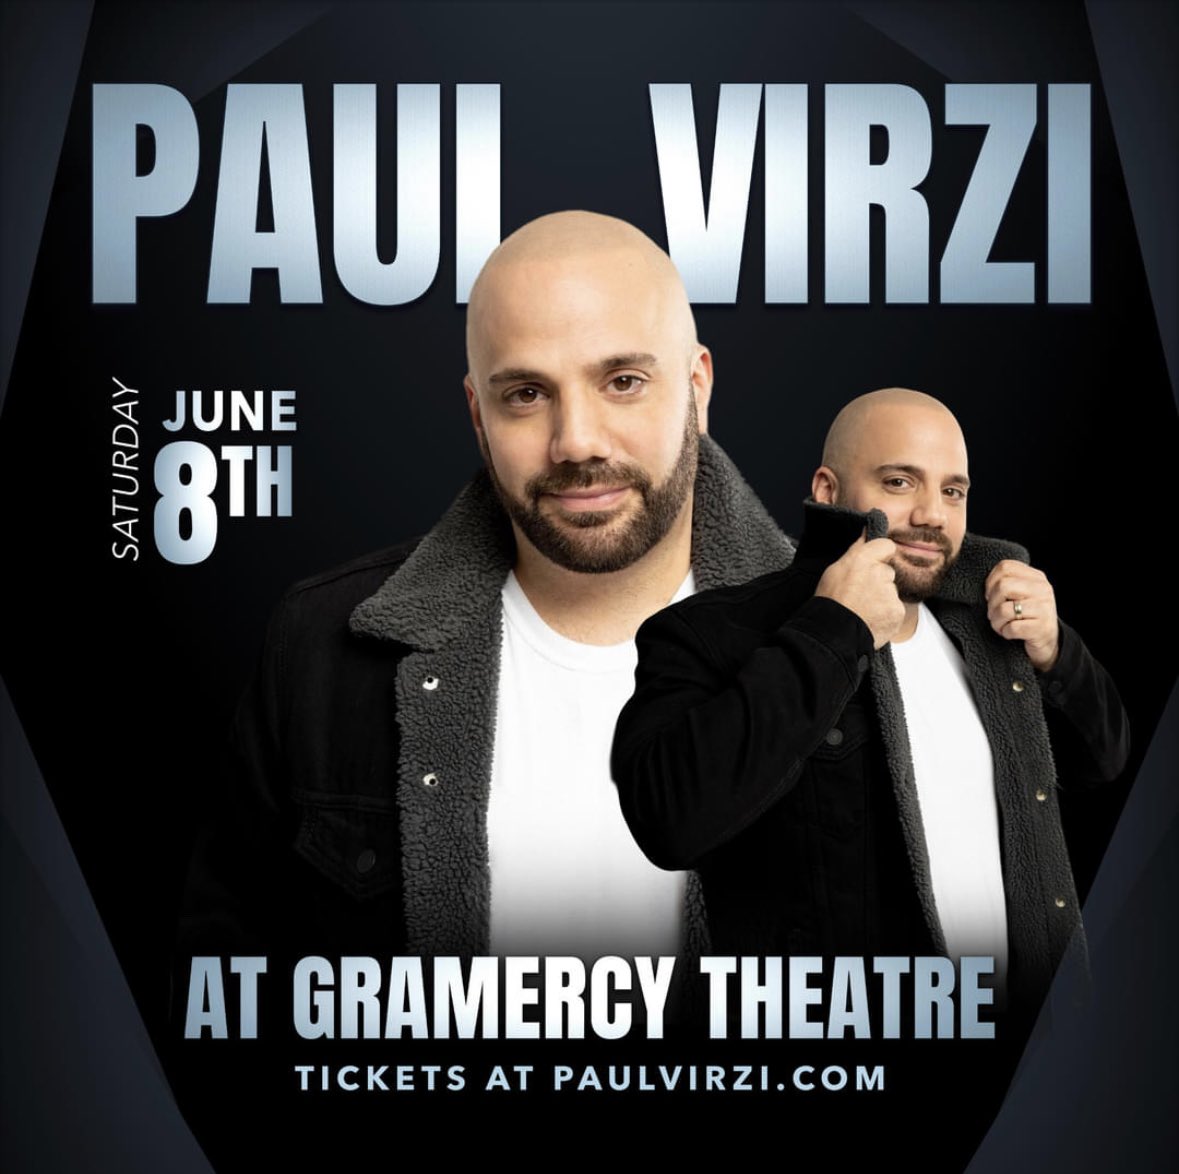 NYC!!! @GramercyTheatre June 8th!! Going to be 🔥🔥🔥 Get in there! Paulvirzi.com